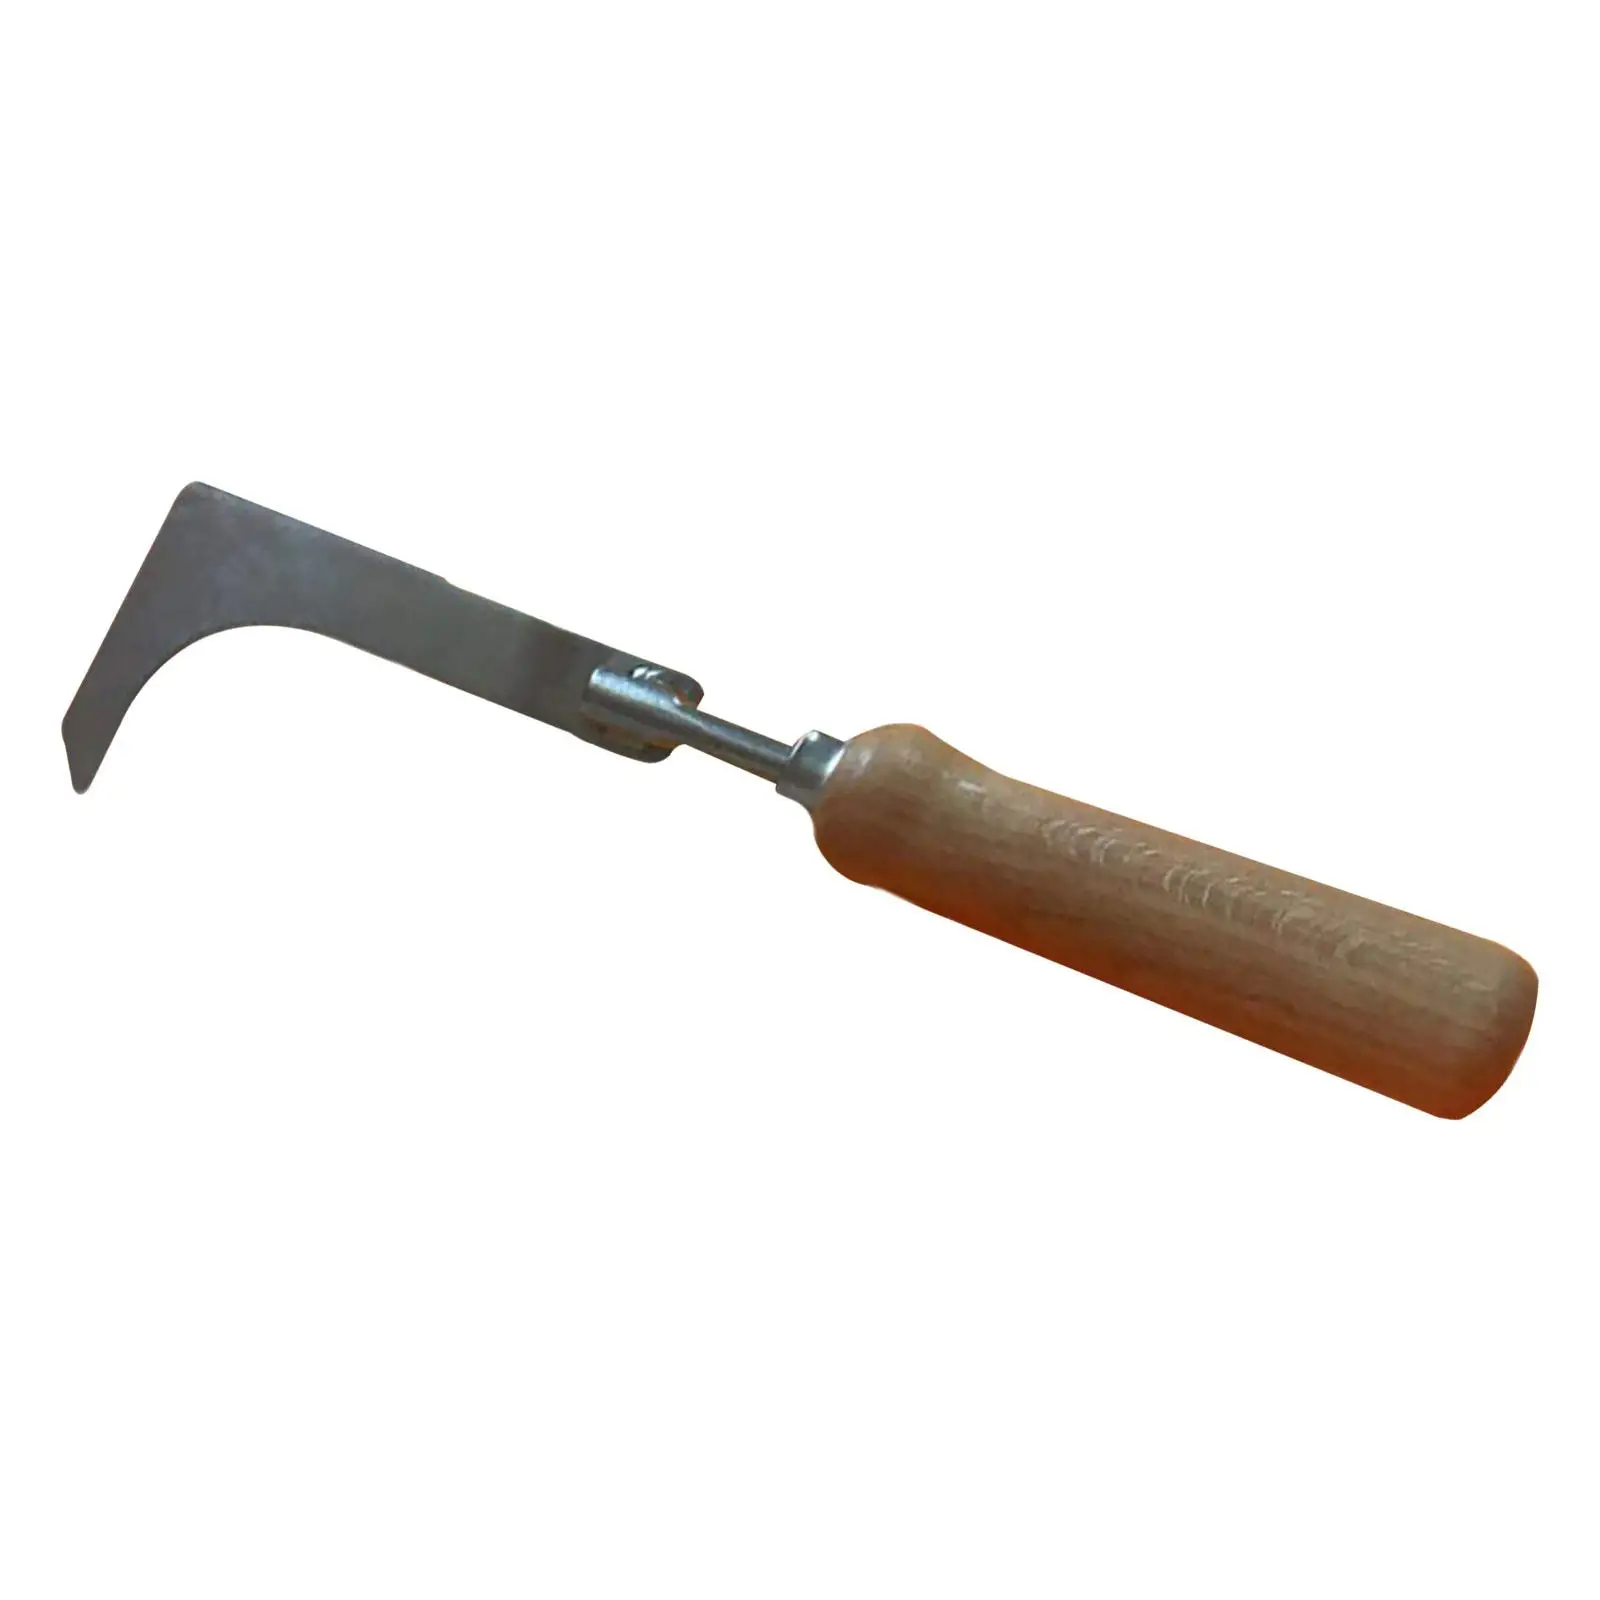 Manual Weeder Wooden Handle Grass Cutter Lawn Yard Gardening Tool Driveway Weeds Puller for Lawn Driveway Patio Gardening Garden